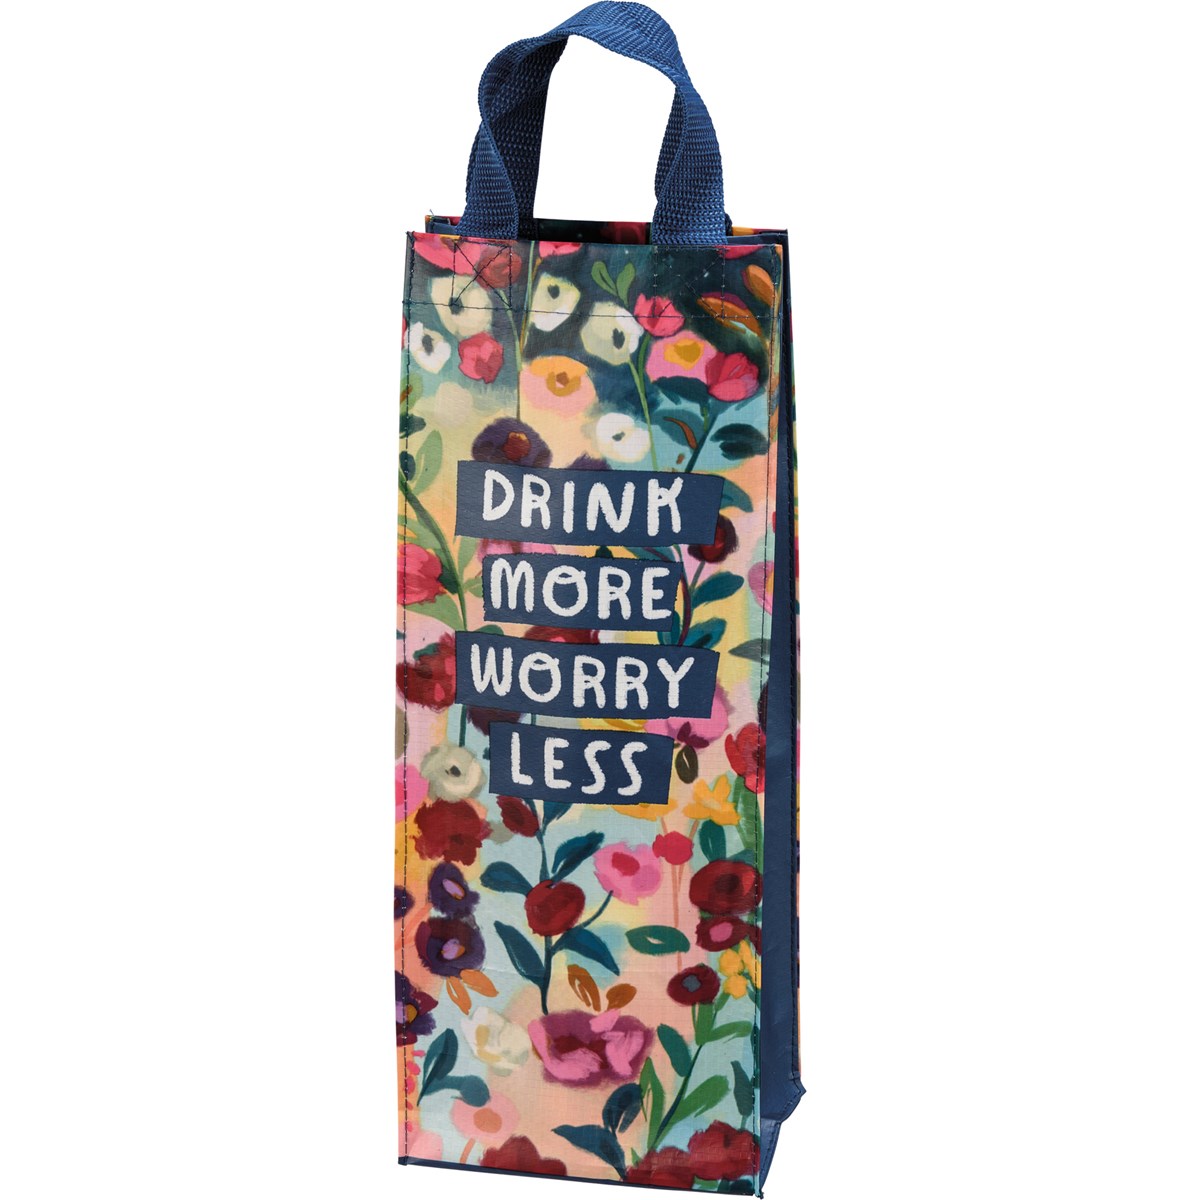 Drink More Worry Less Wine Tote - Post-Consumer Material, Nylon